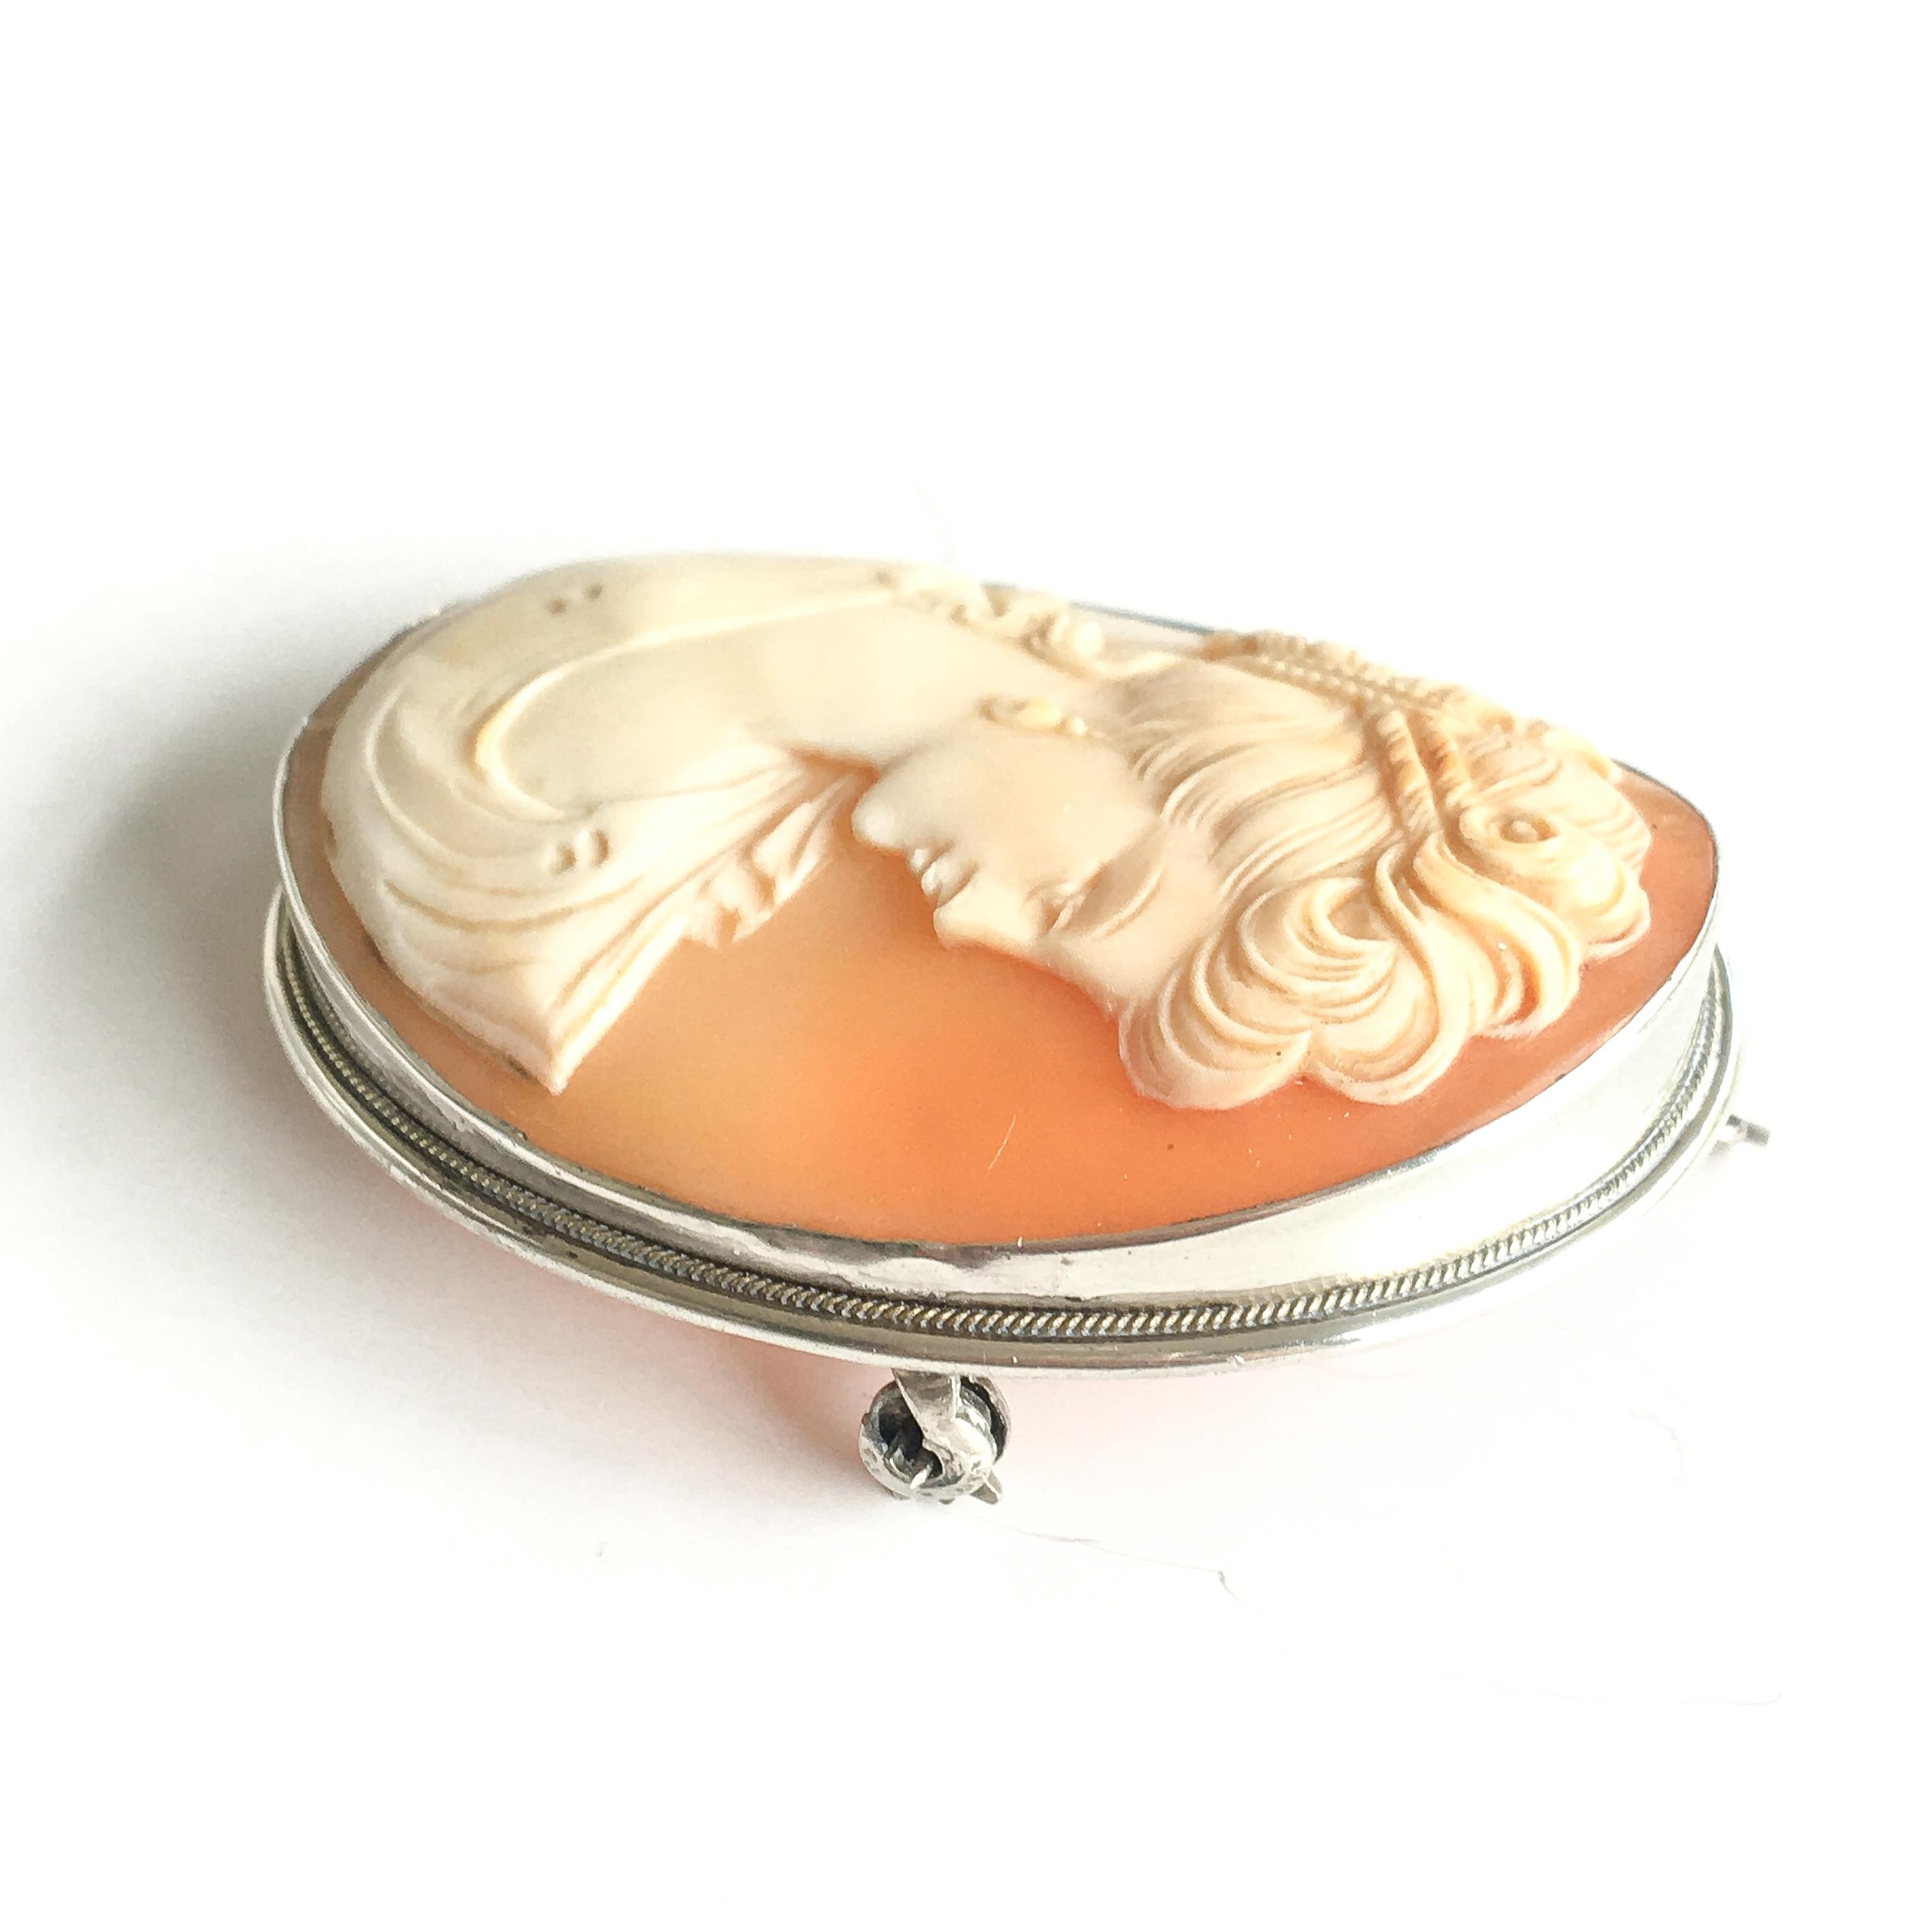 Relief Shell Cameo Silver Pendant Brooch 1